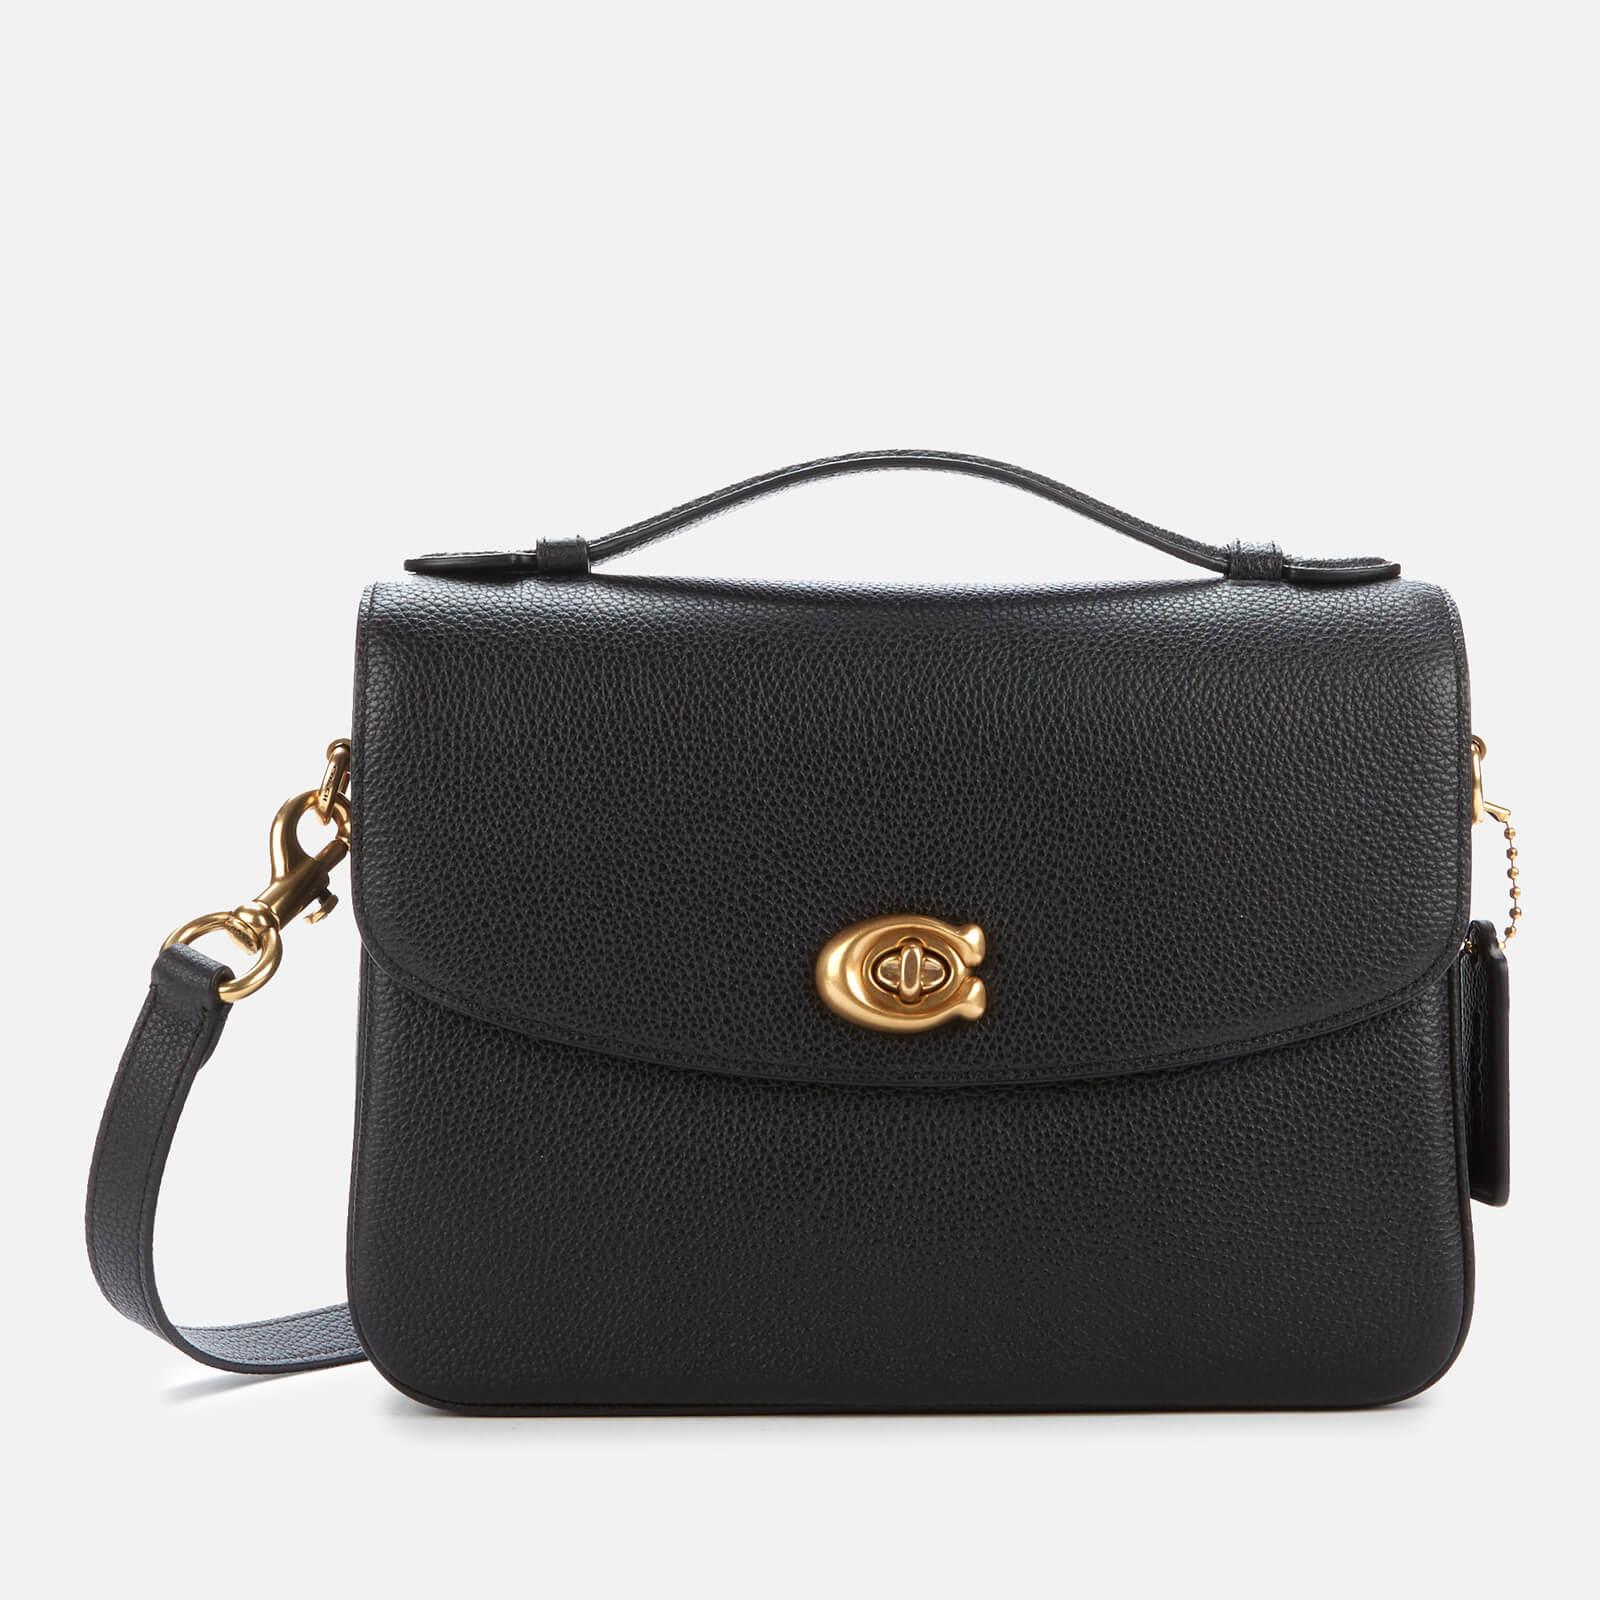 COACH Polished Pebbled Leather Cassie Cross Body Bag in Black - Lyst